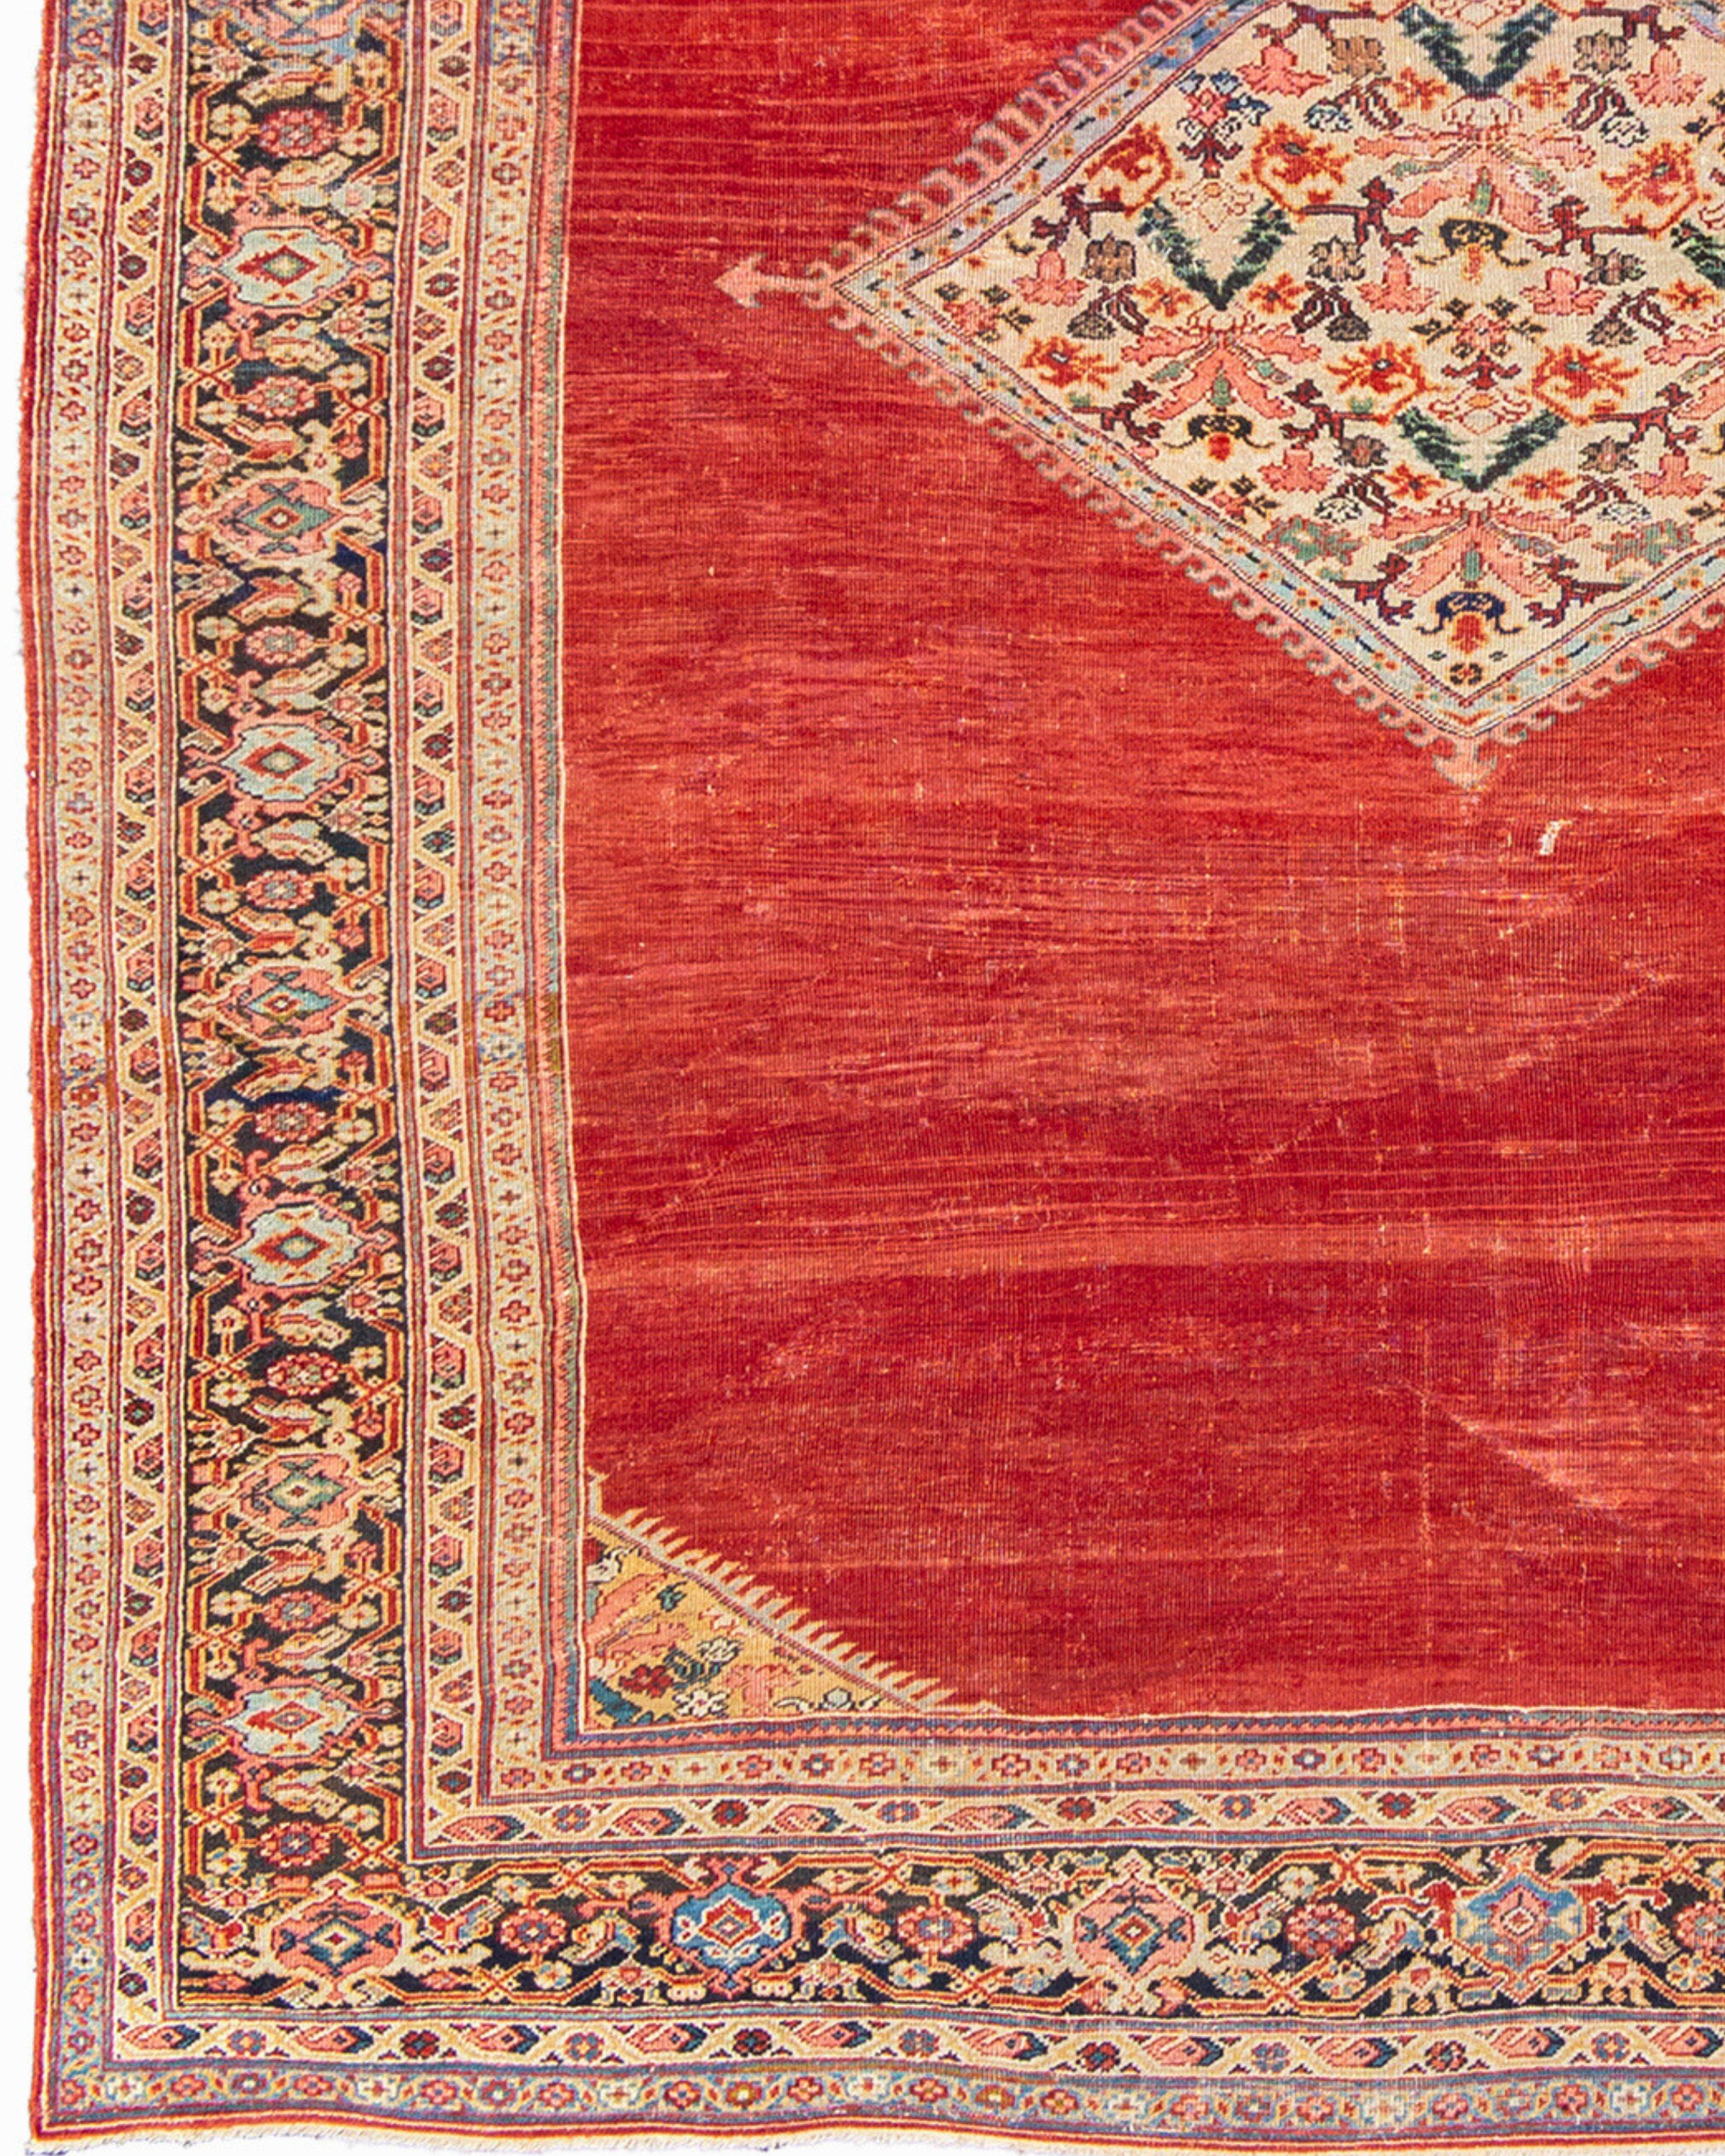 Antique Persian Mahal Carpet, c. 1900 In Good Condition For Sale In San Francisco, CA